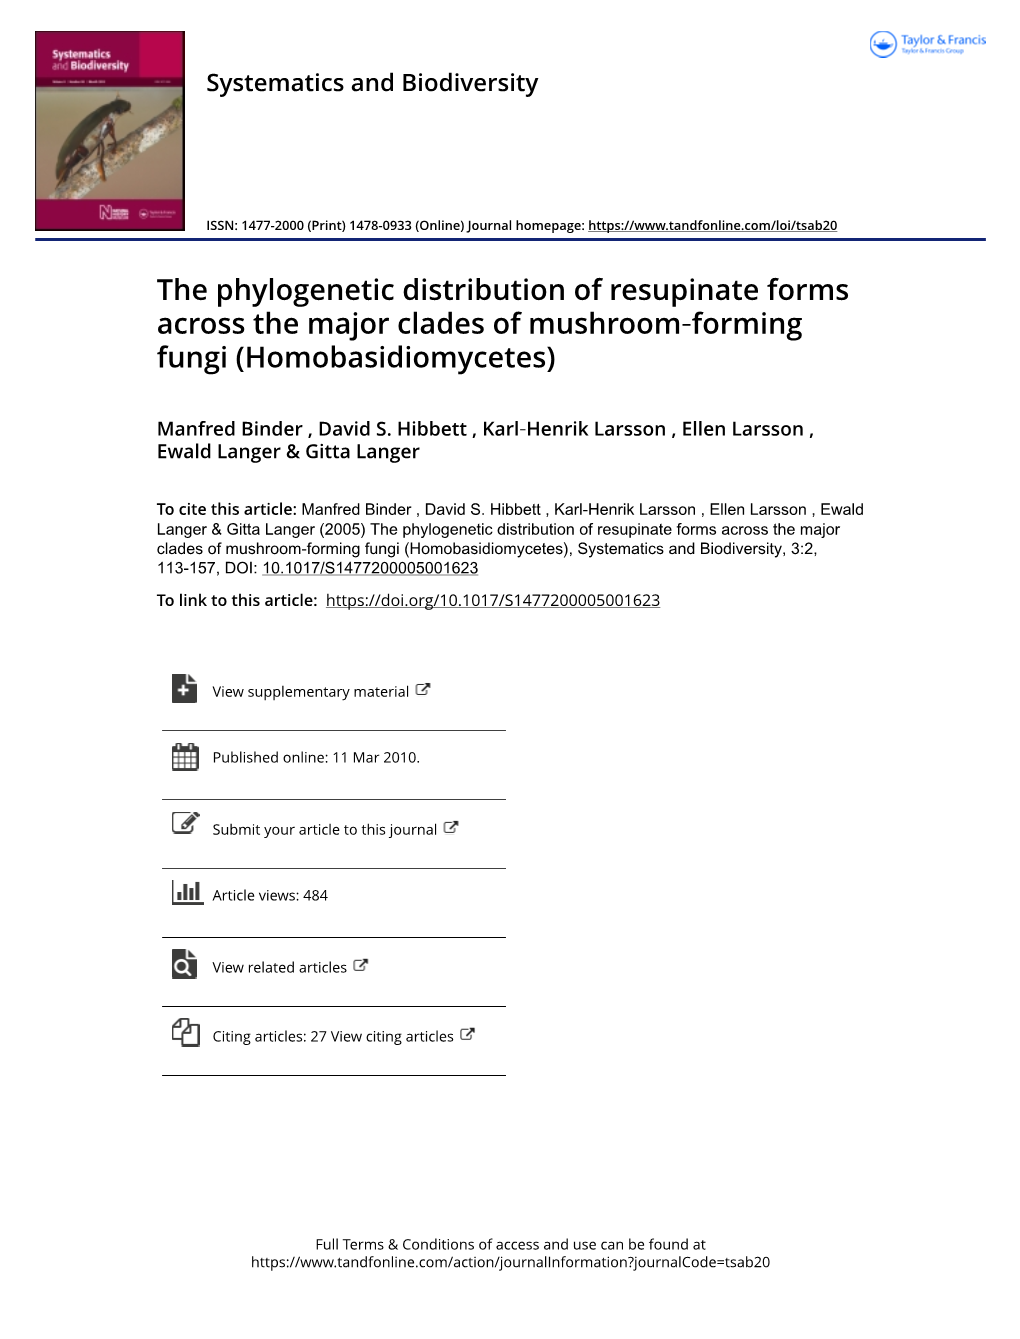 The Phylogenetic Distribution of Resupinate Forms Across the Major Clades of Mushroom‐Forming Fungi (Homobasidiomycetes)